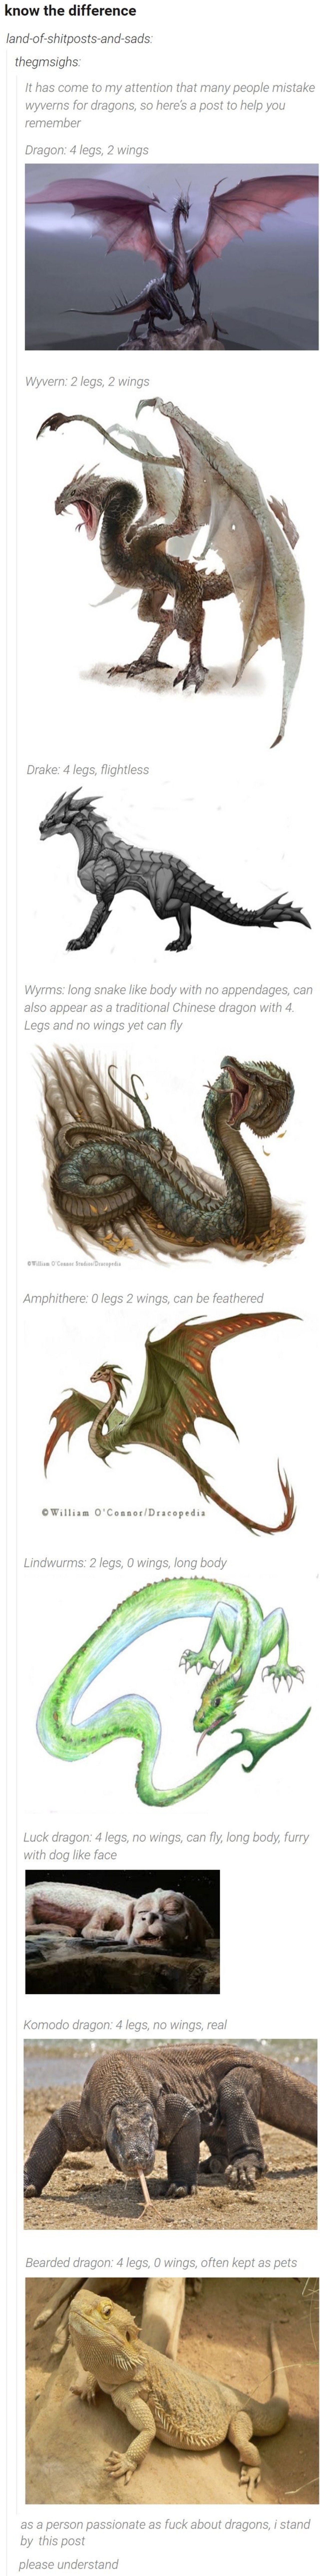 Know Your Dragons. .. What about 3 legs, 1 wing?